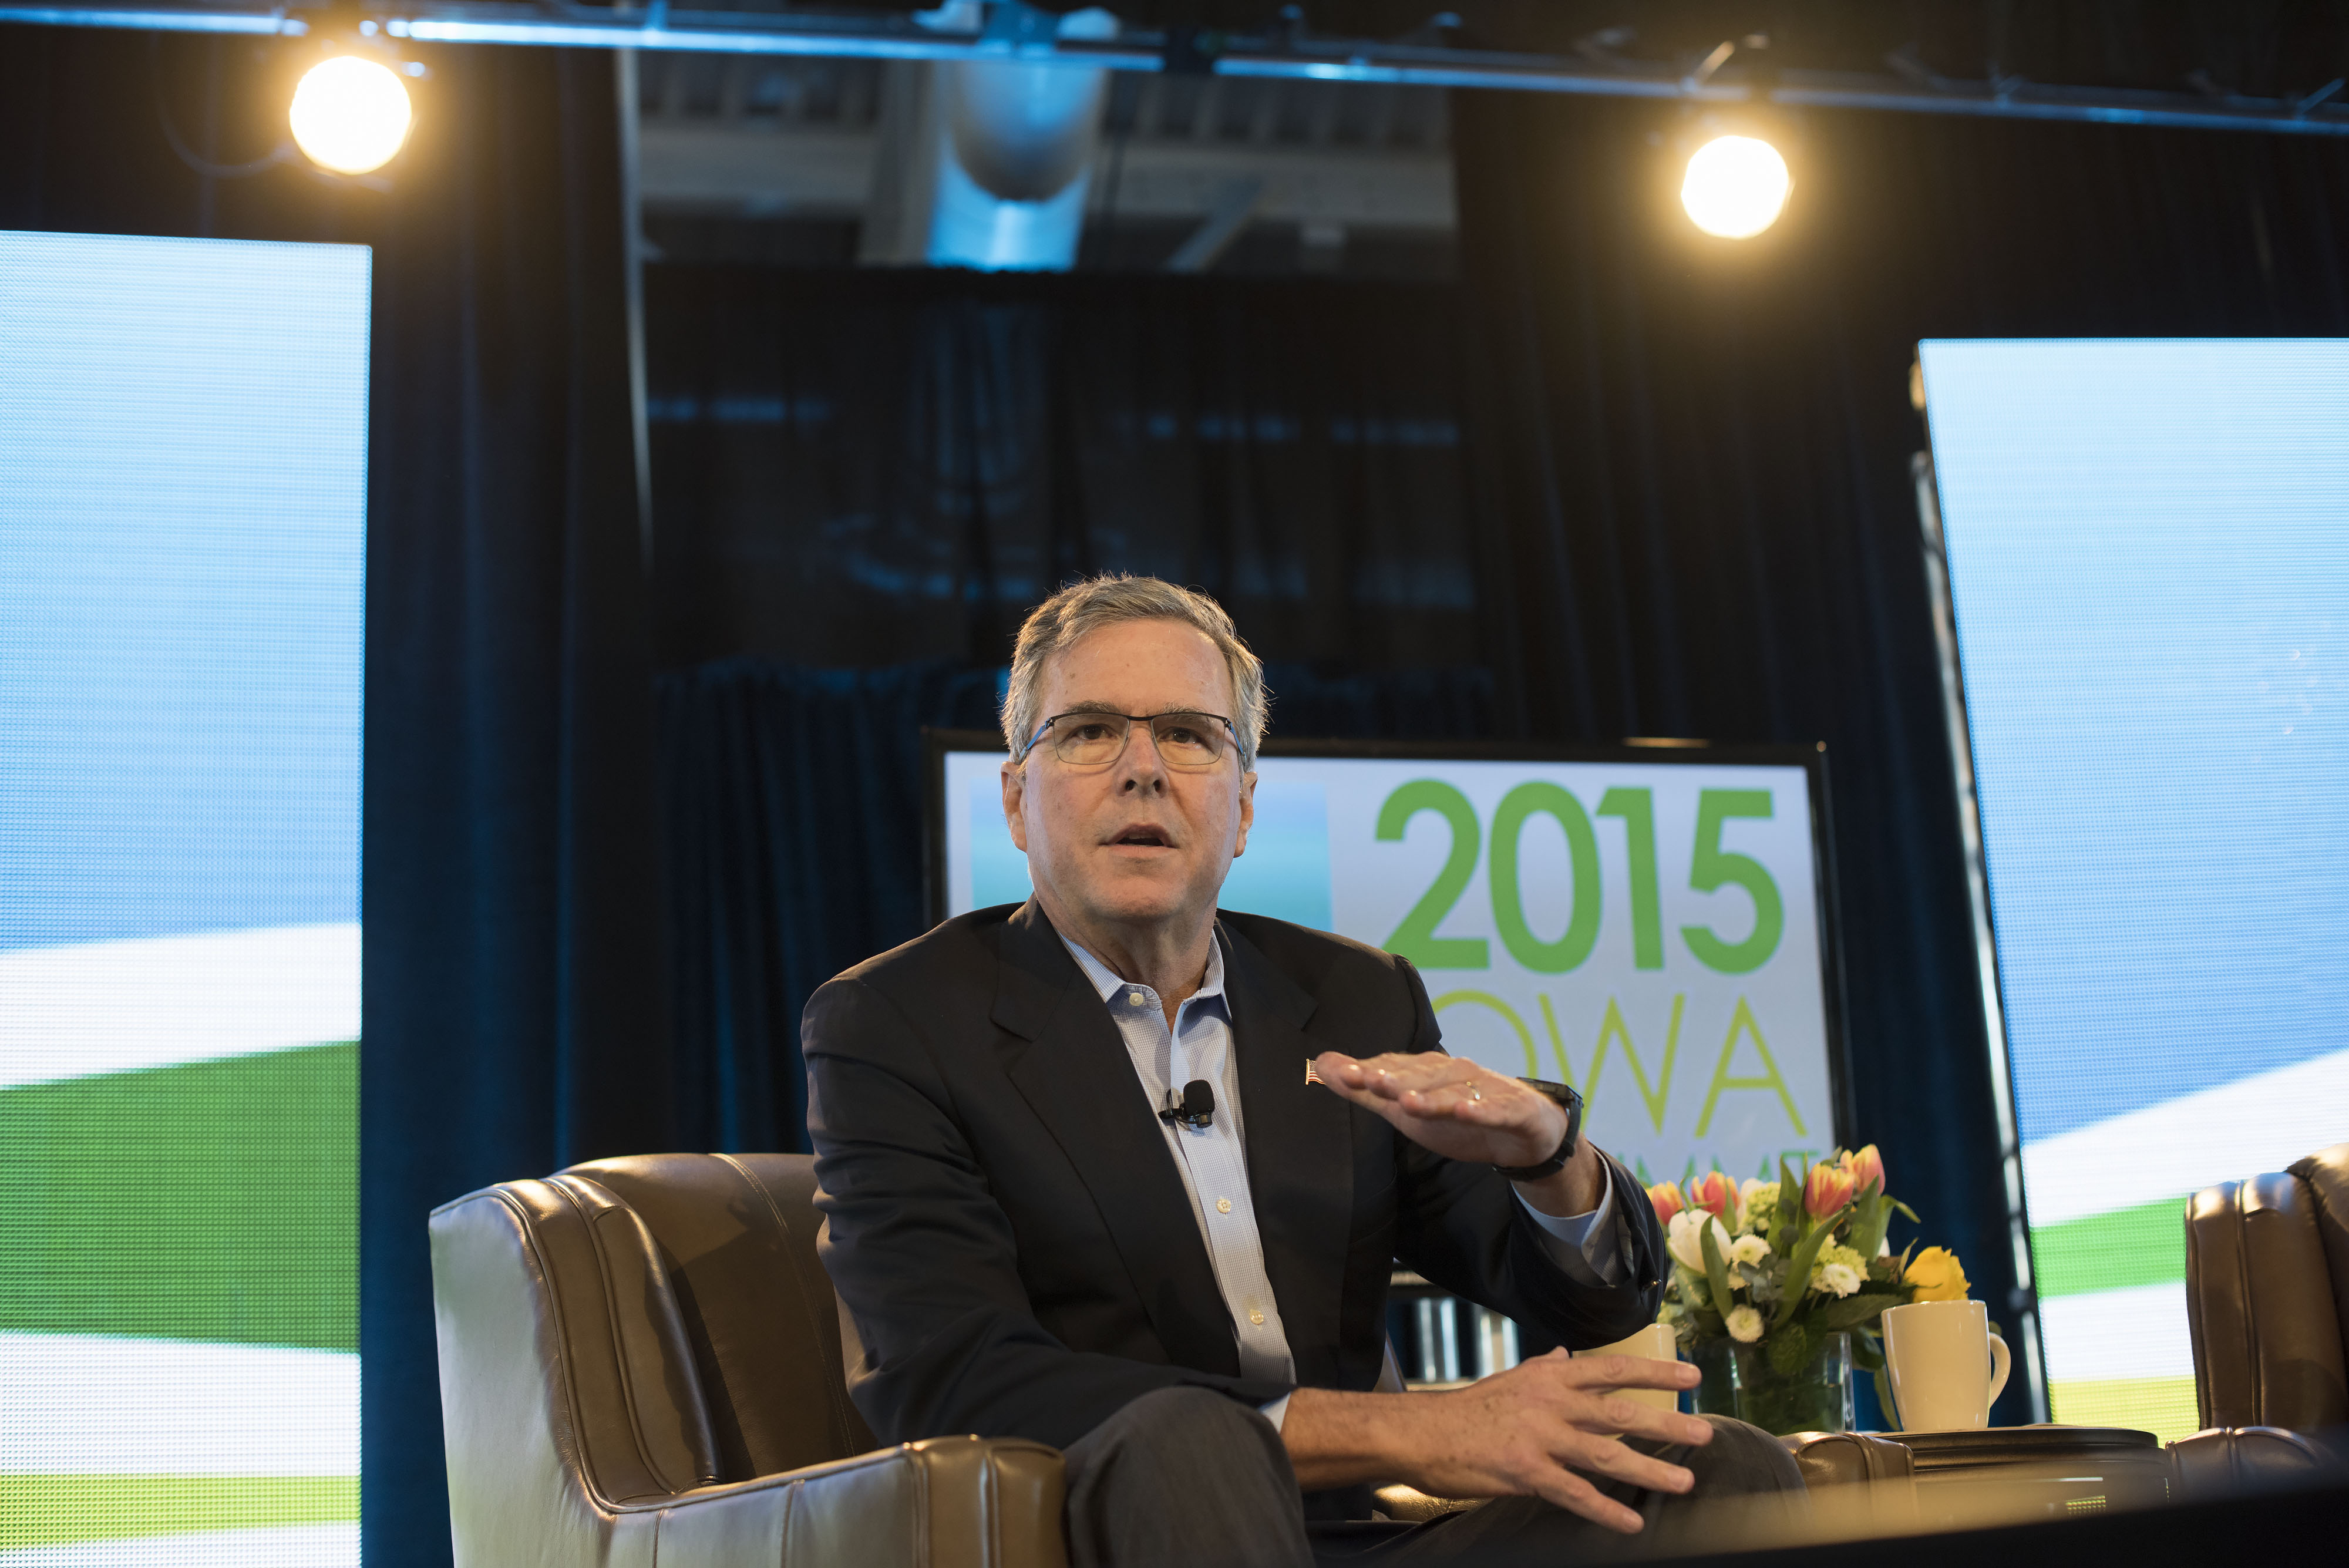 Jeb Bush, former governor of Florida, speaks during the Iowa Ag Summit at the Iowa State Fairgrounds in Des Moines, Iowa on March 7, 2015.